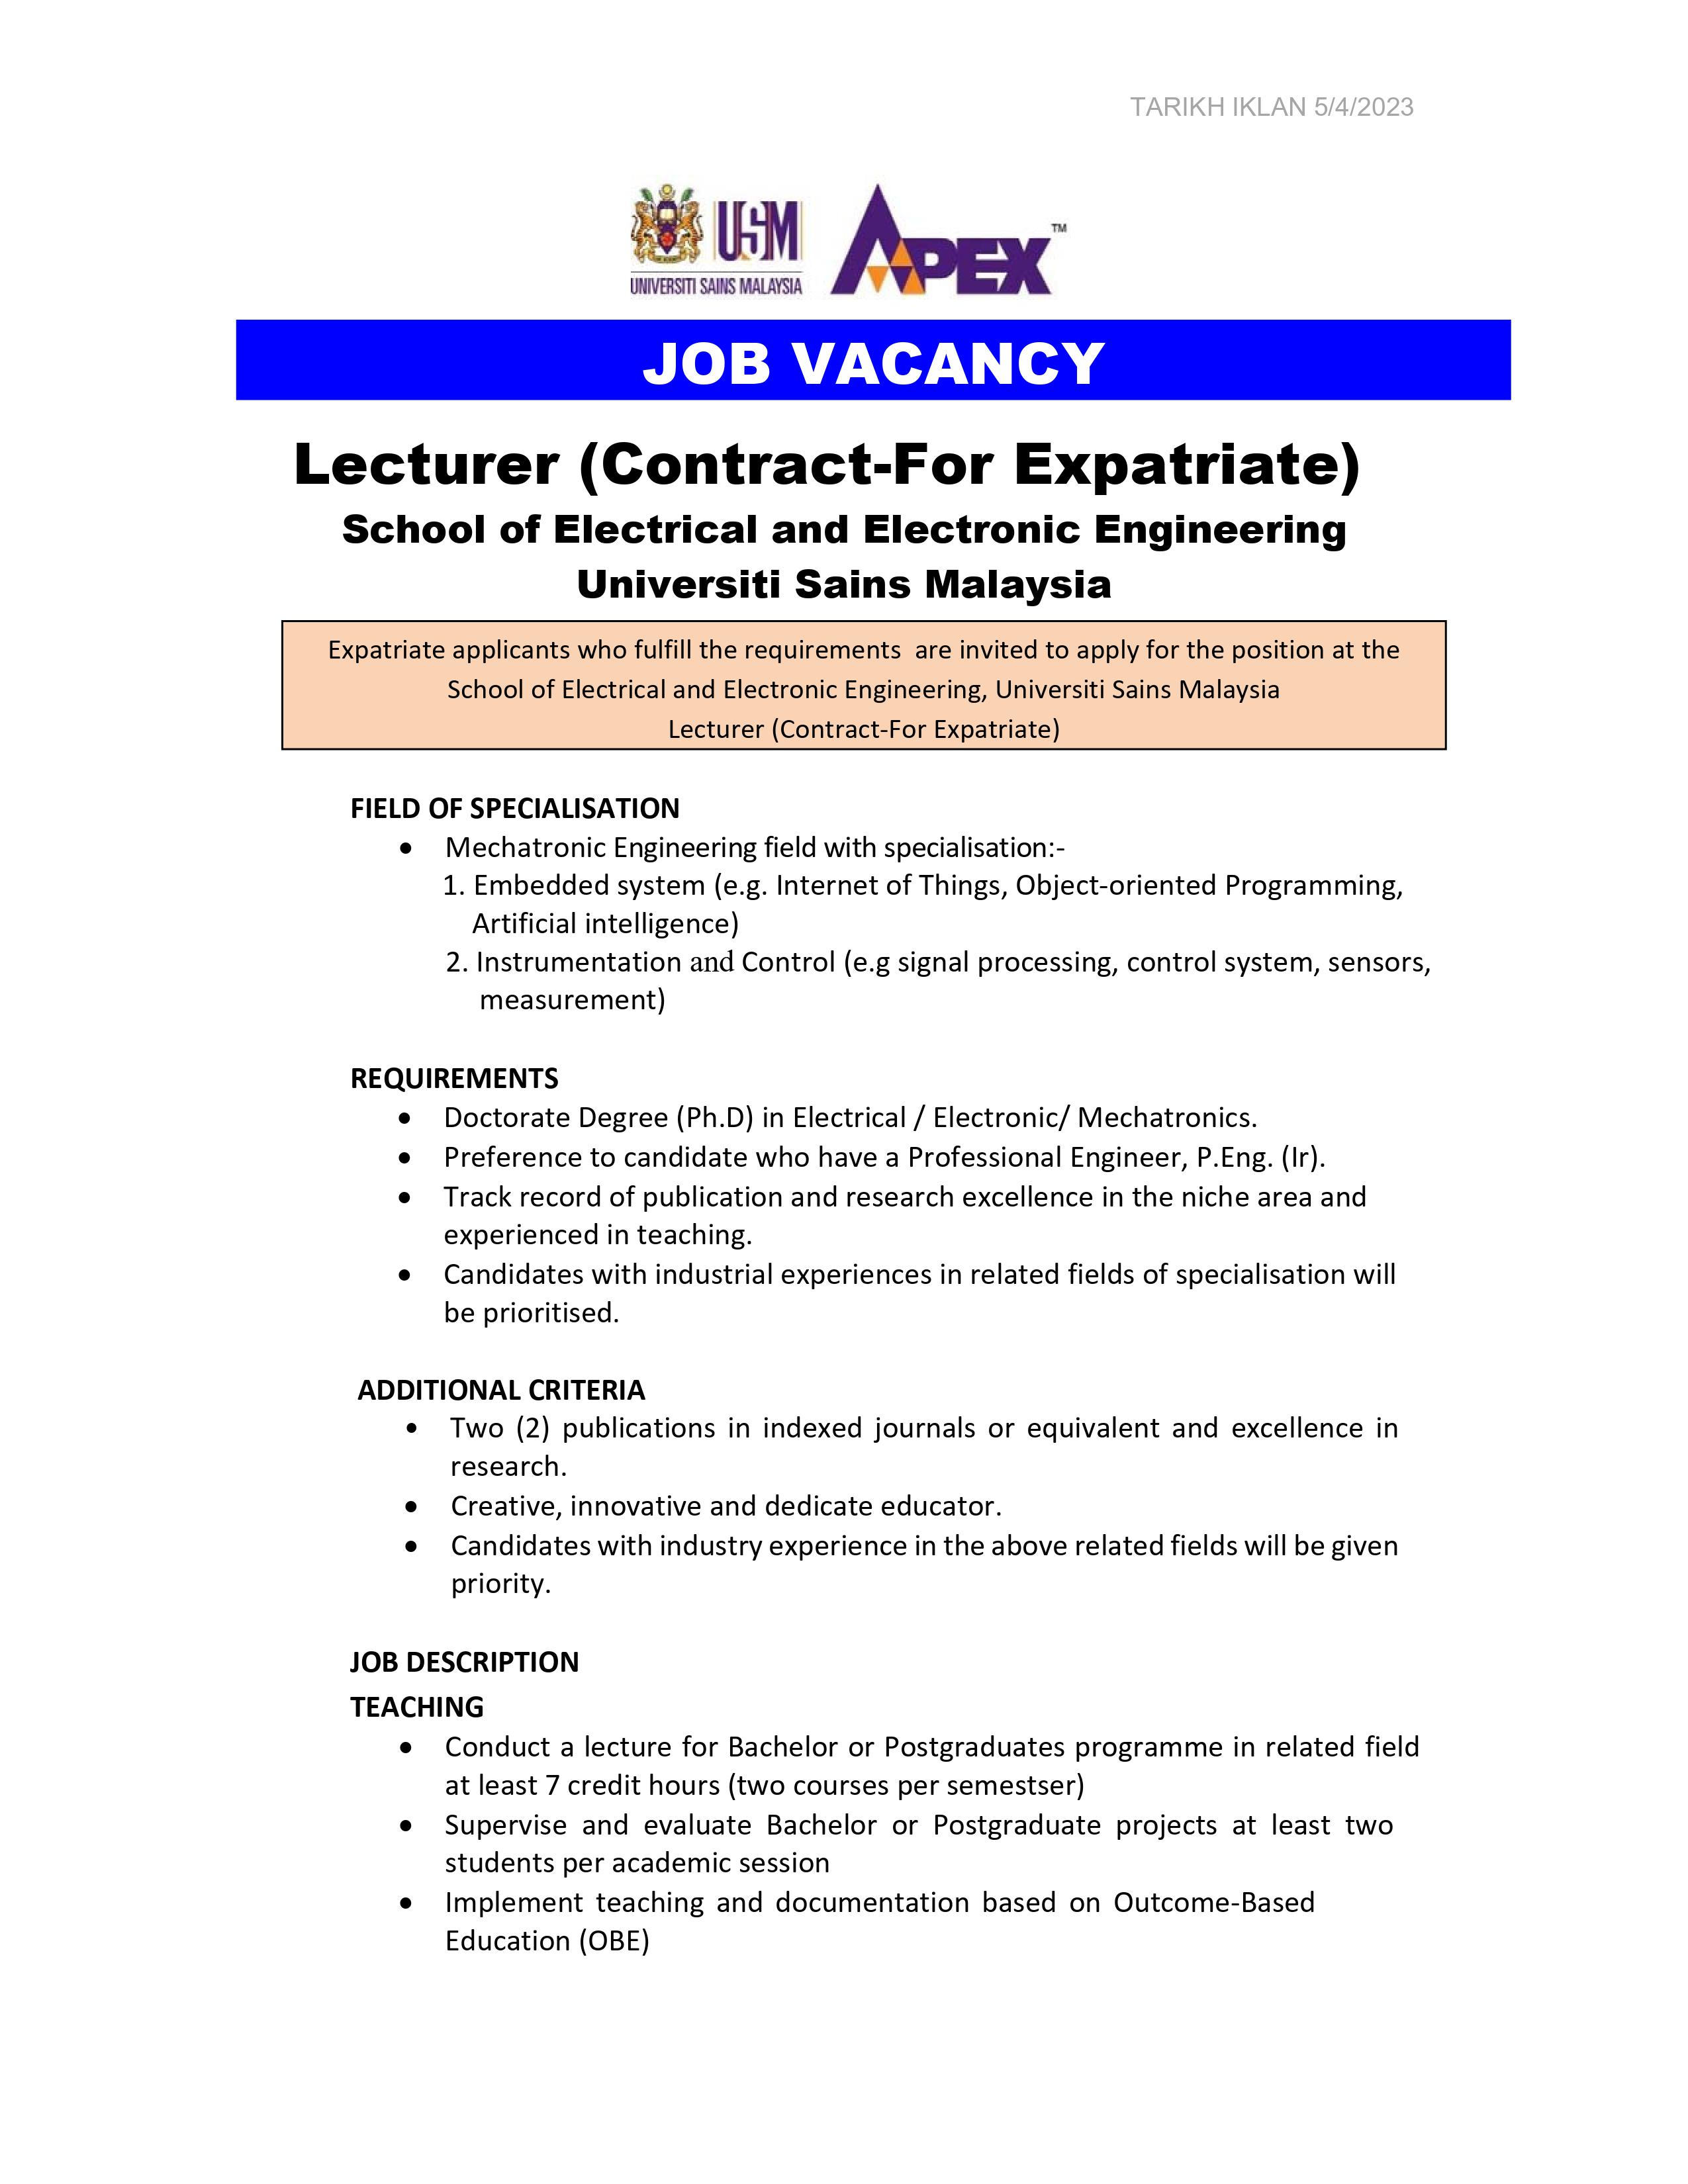 JOB VACANCY Lecturer Contract For Expatriate SEEE USM 20230504 1